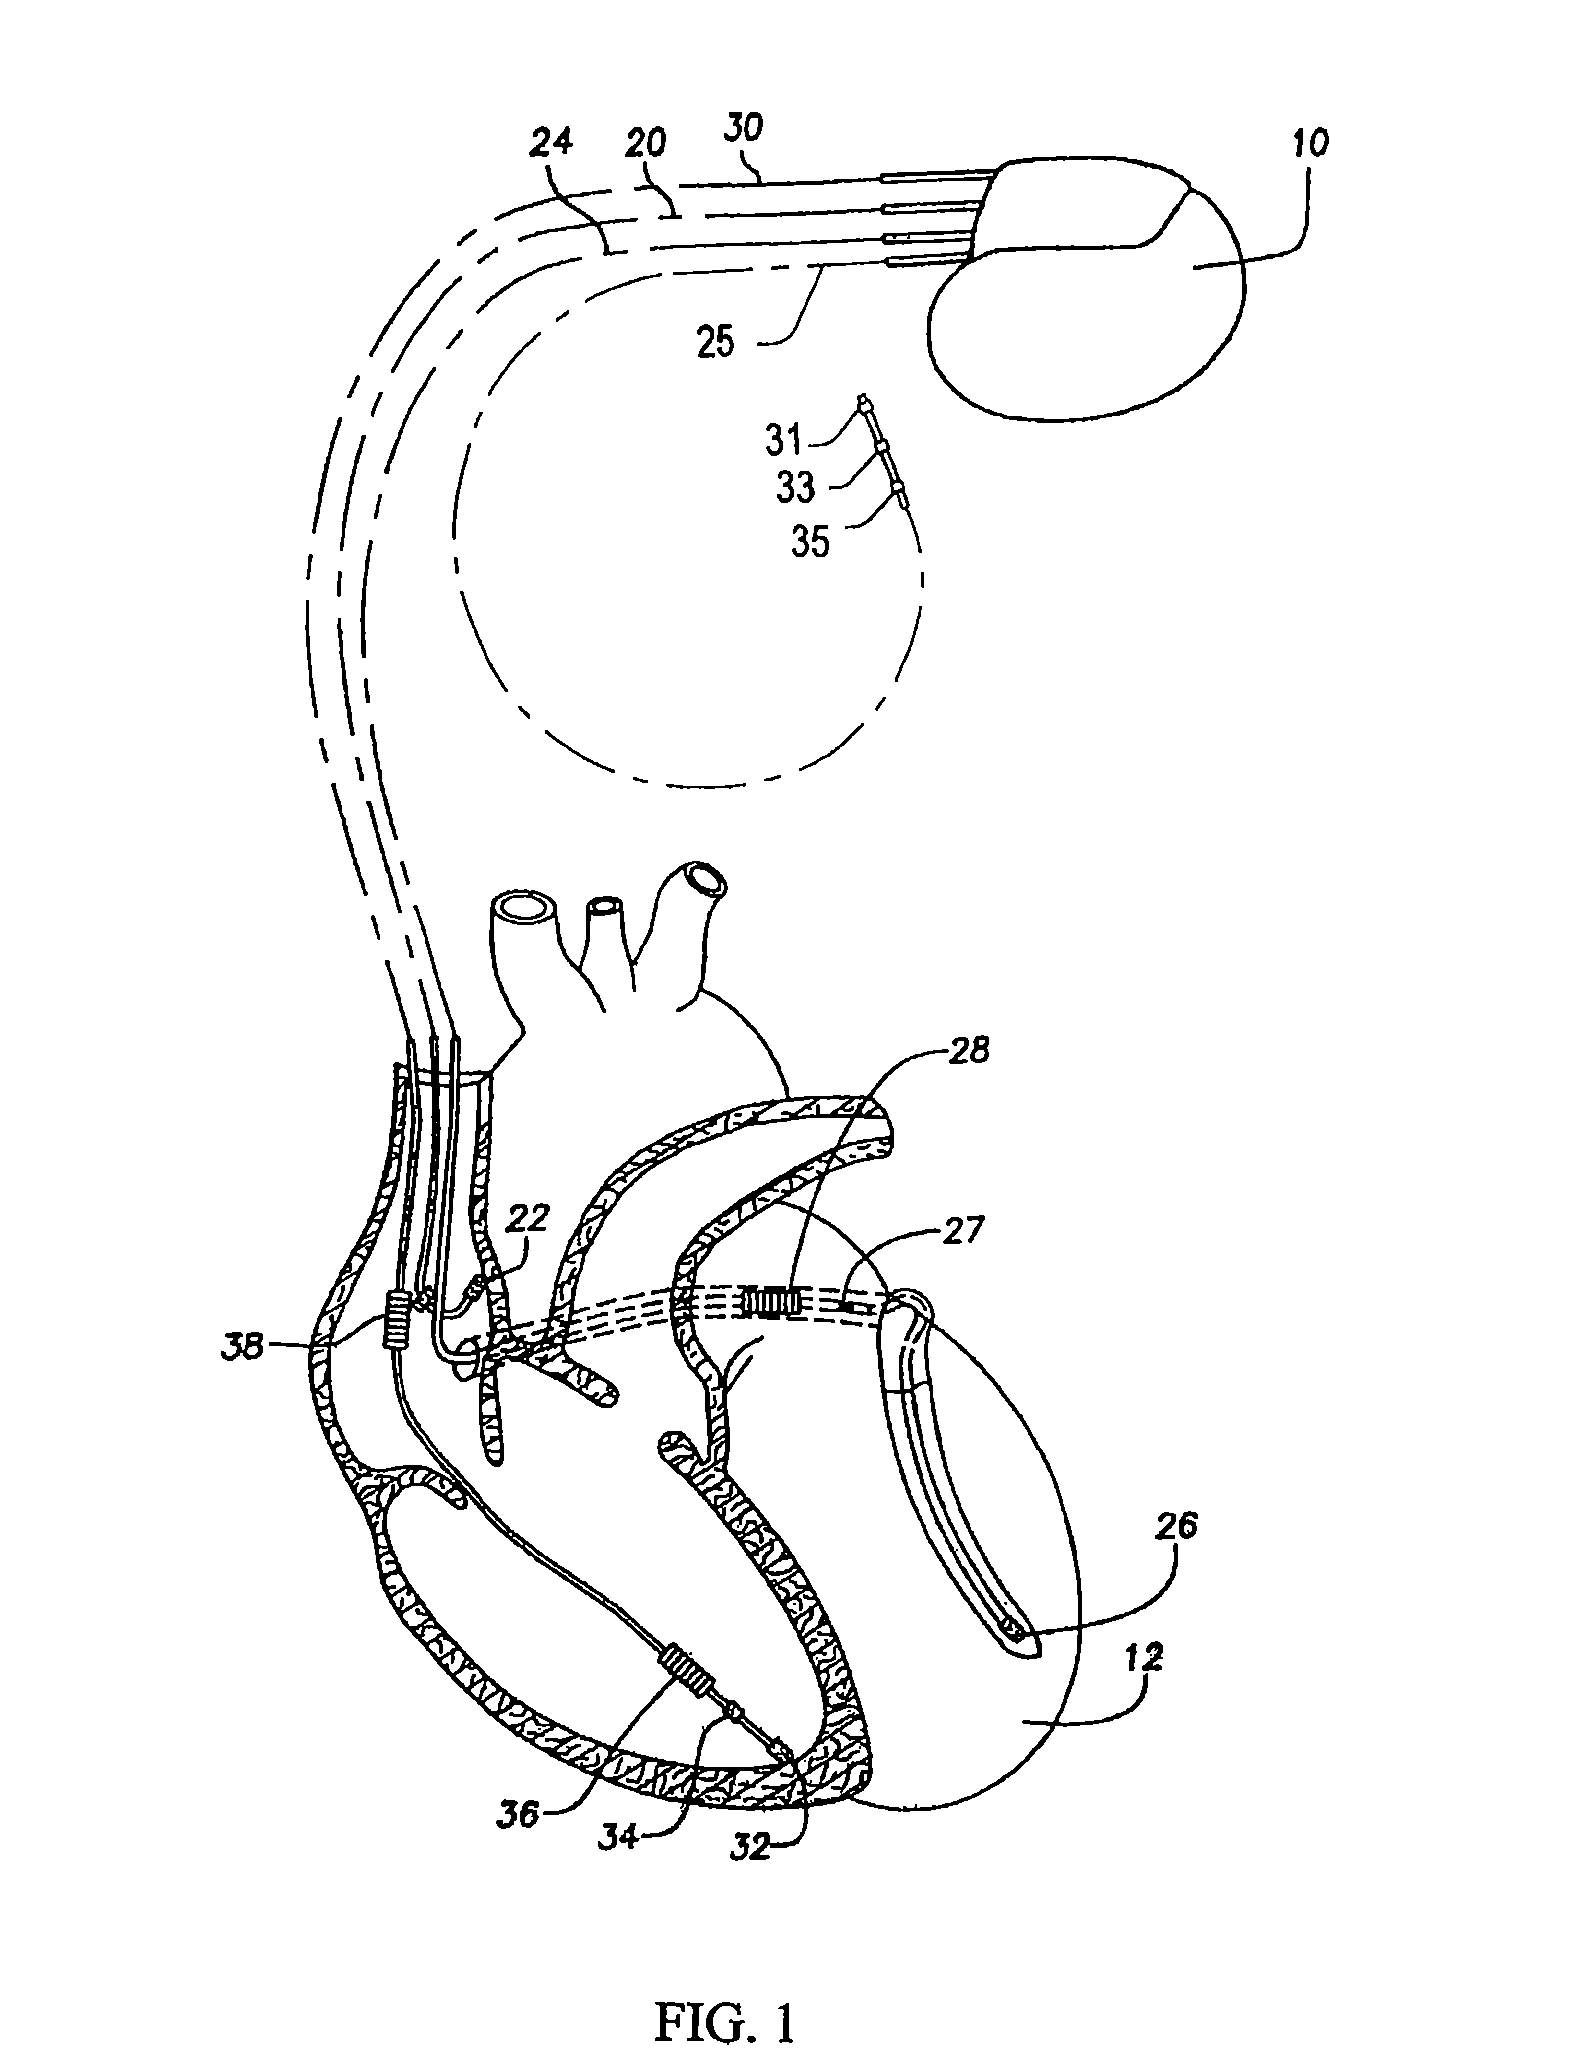 Methods and devices for monitoring myocardial electro-mechanical stability